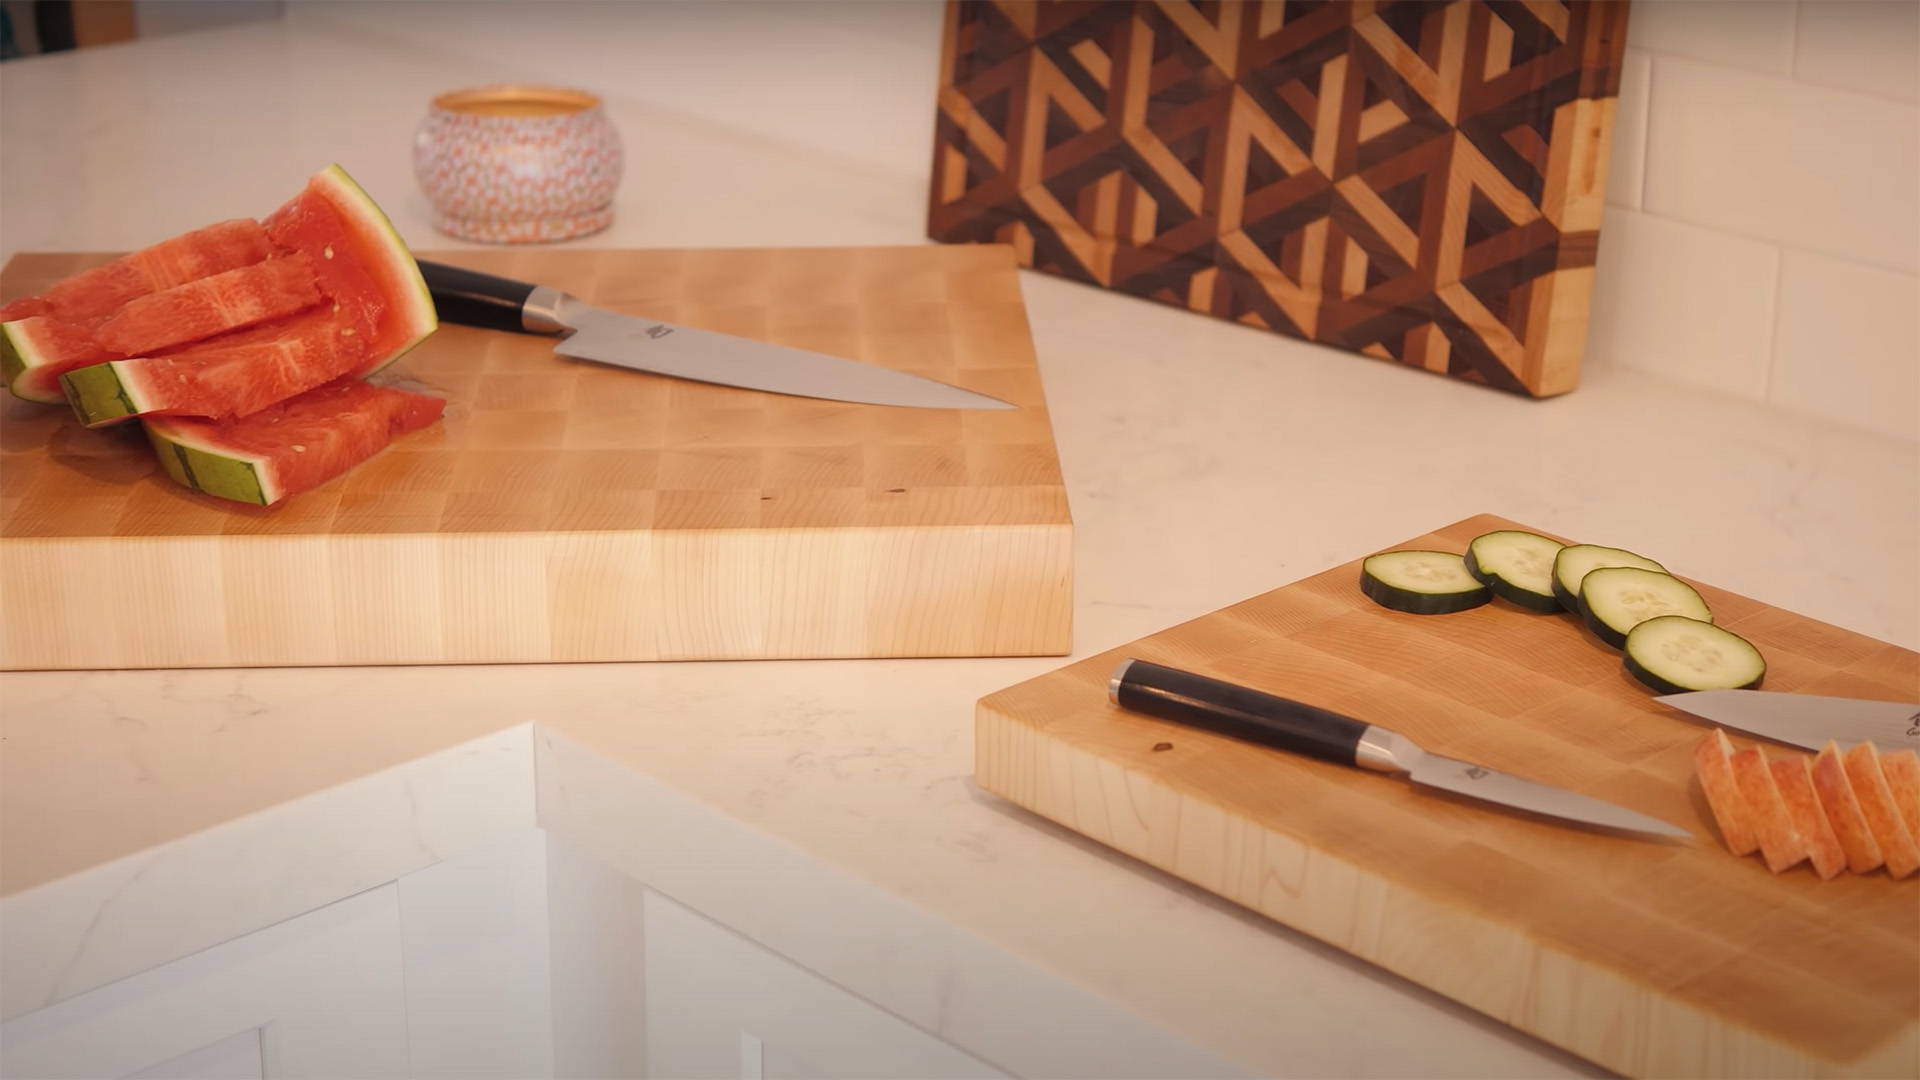 Cut Veggies in 'a Matter of Seconds' With This 12-Blade Chopper